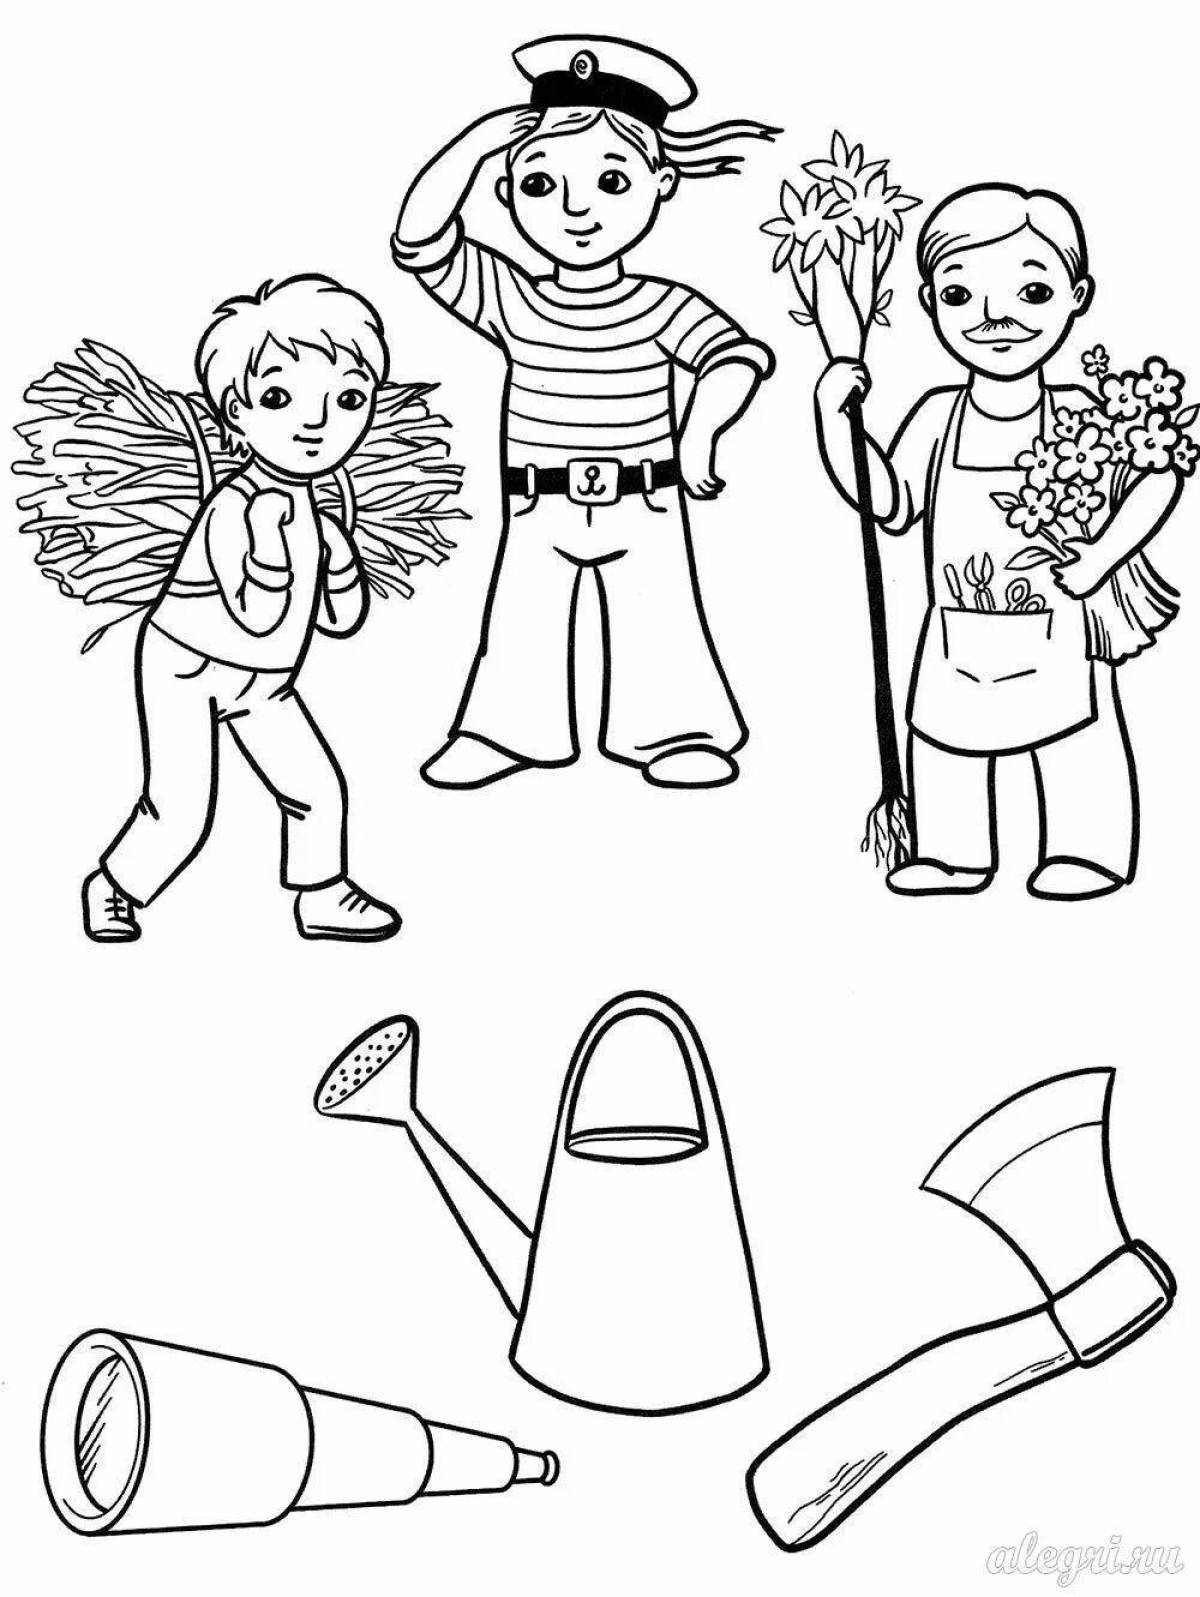 Updating the coloring page what you need